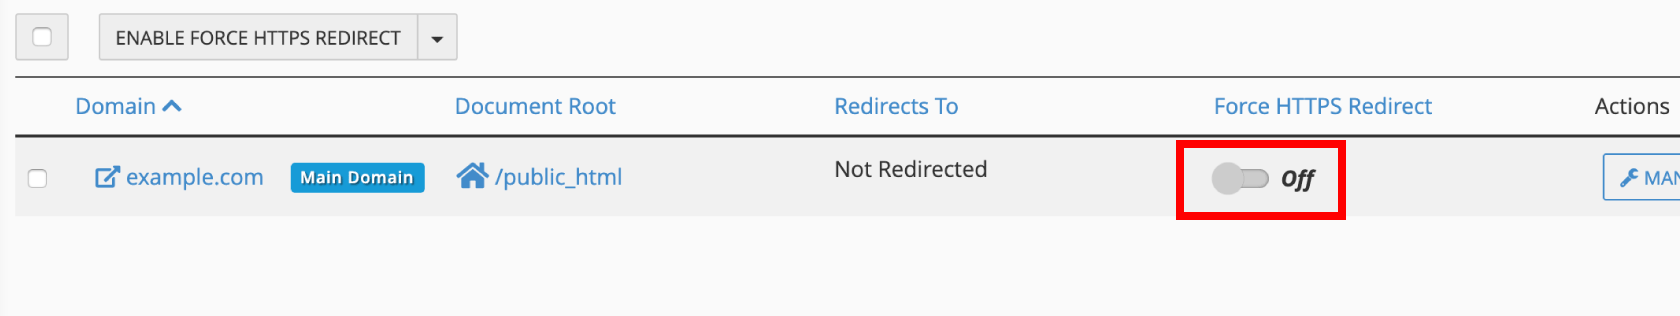 Enable Force HTTPS Redirect in cPanel